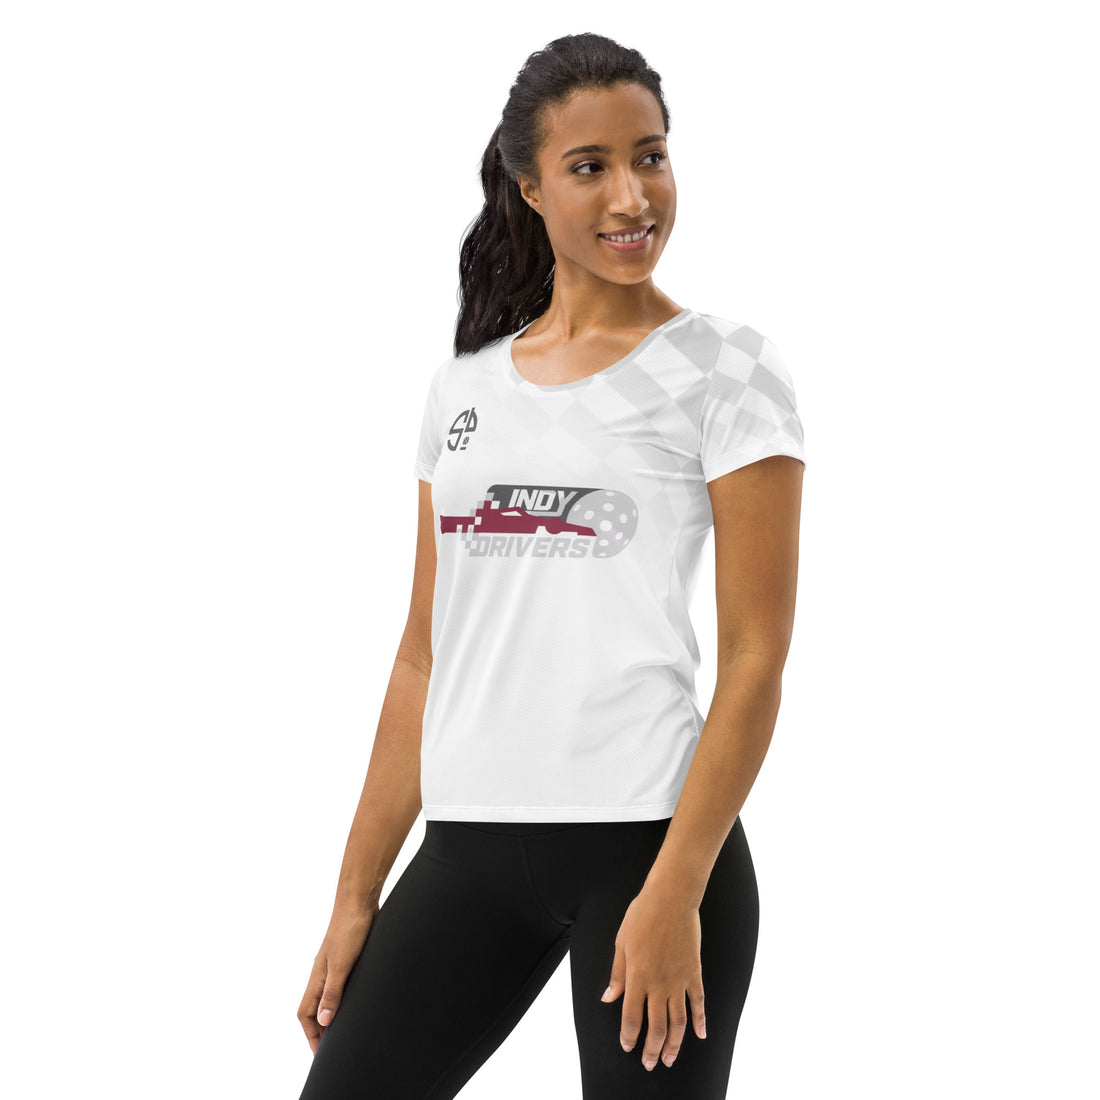 "Nagrani 23" Indy Drivers™ Replica Women's Pickleball Tournament Athletic Shirt White - One of a kind! Size S